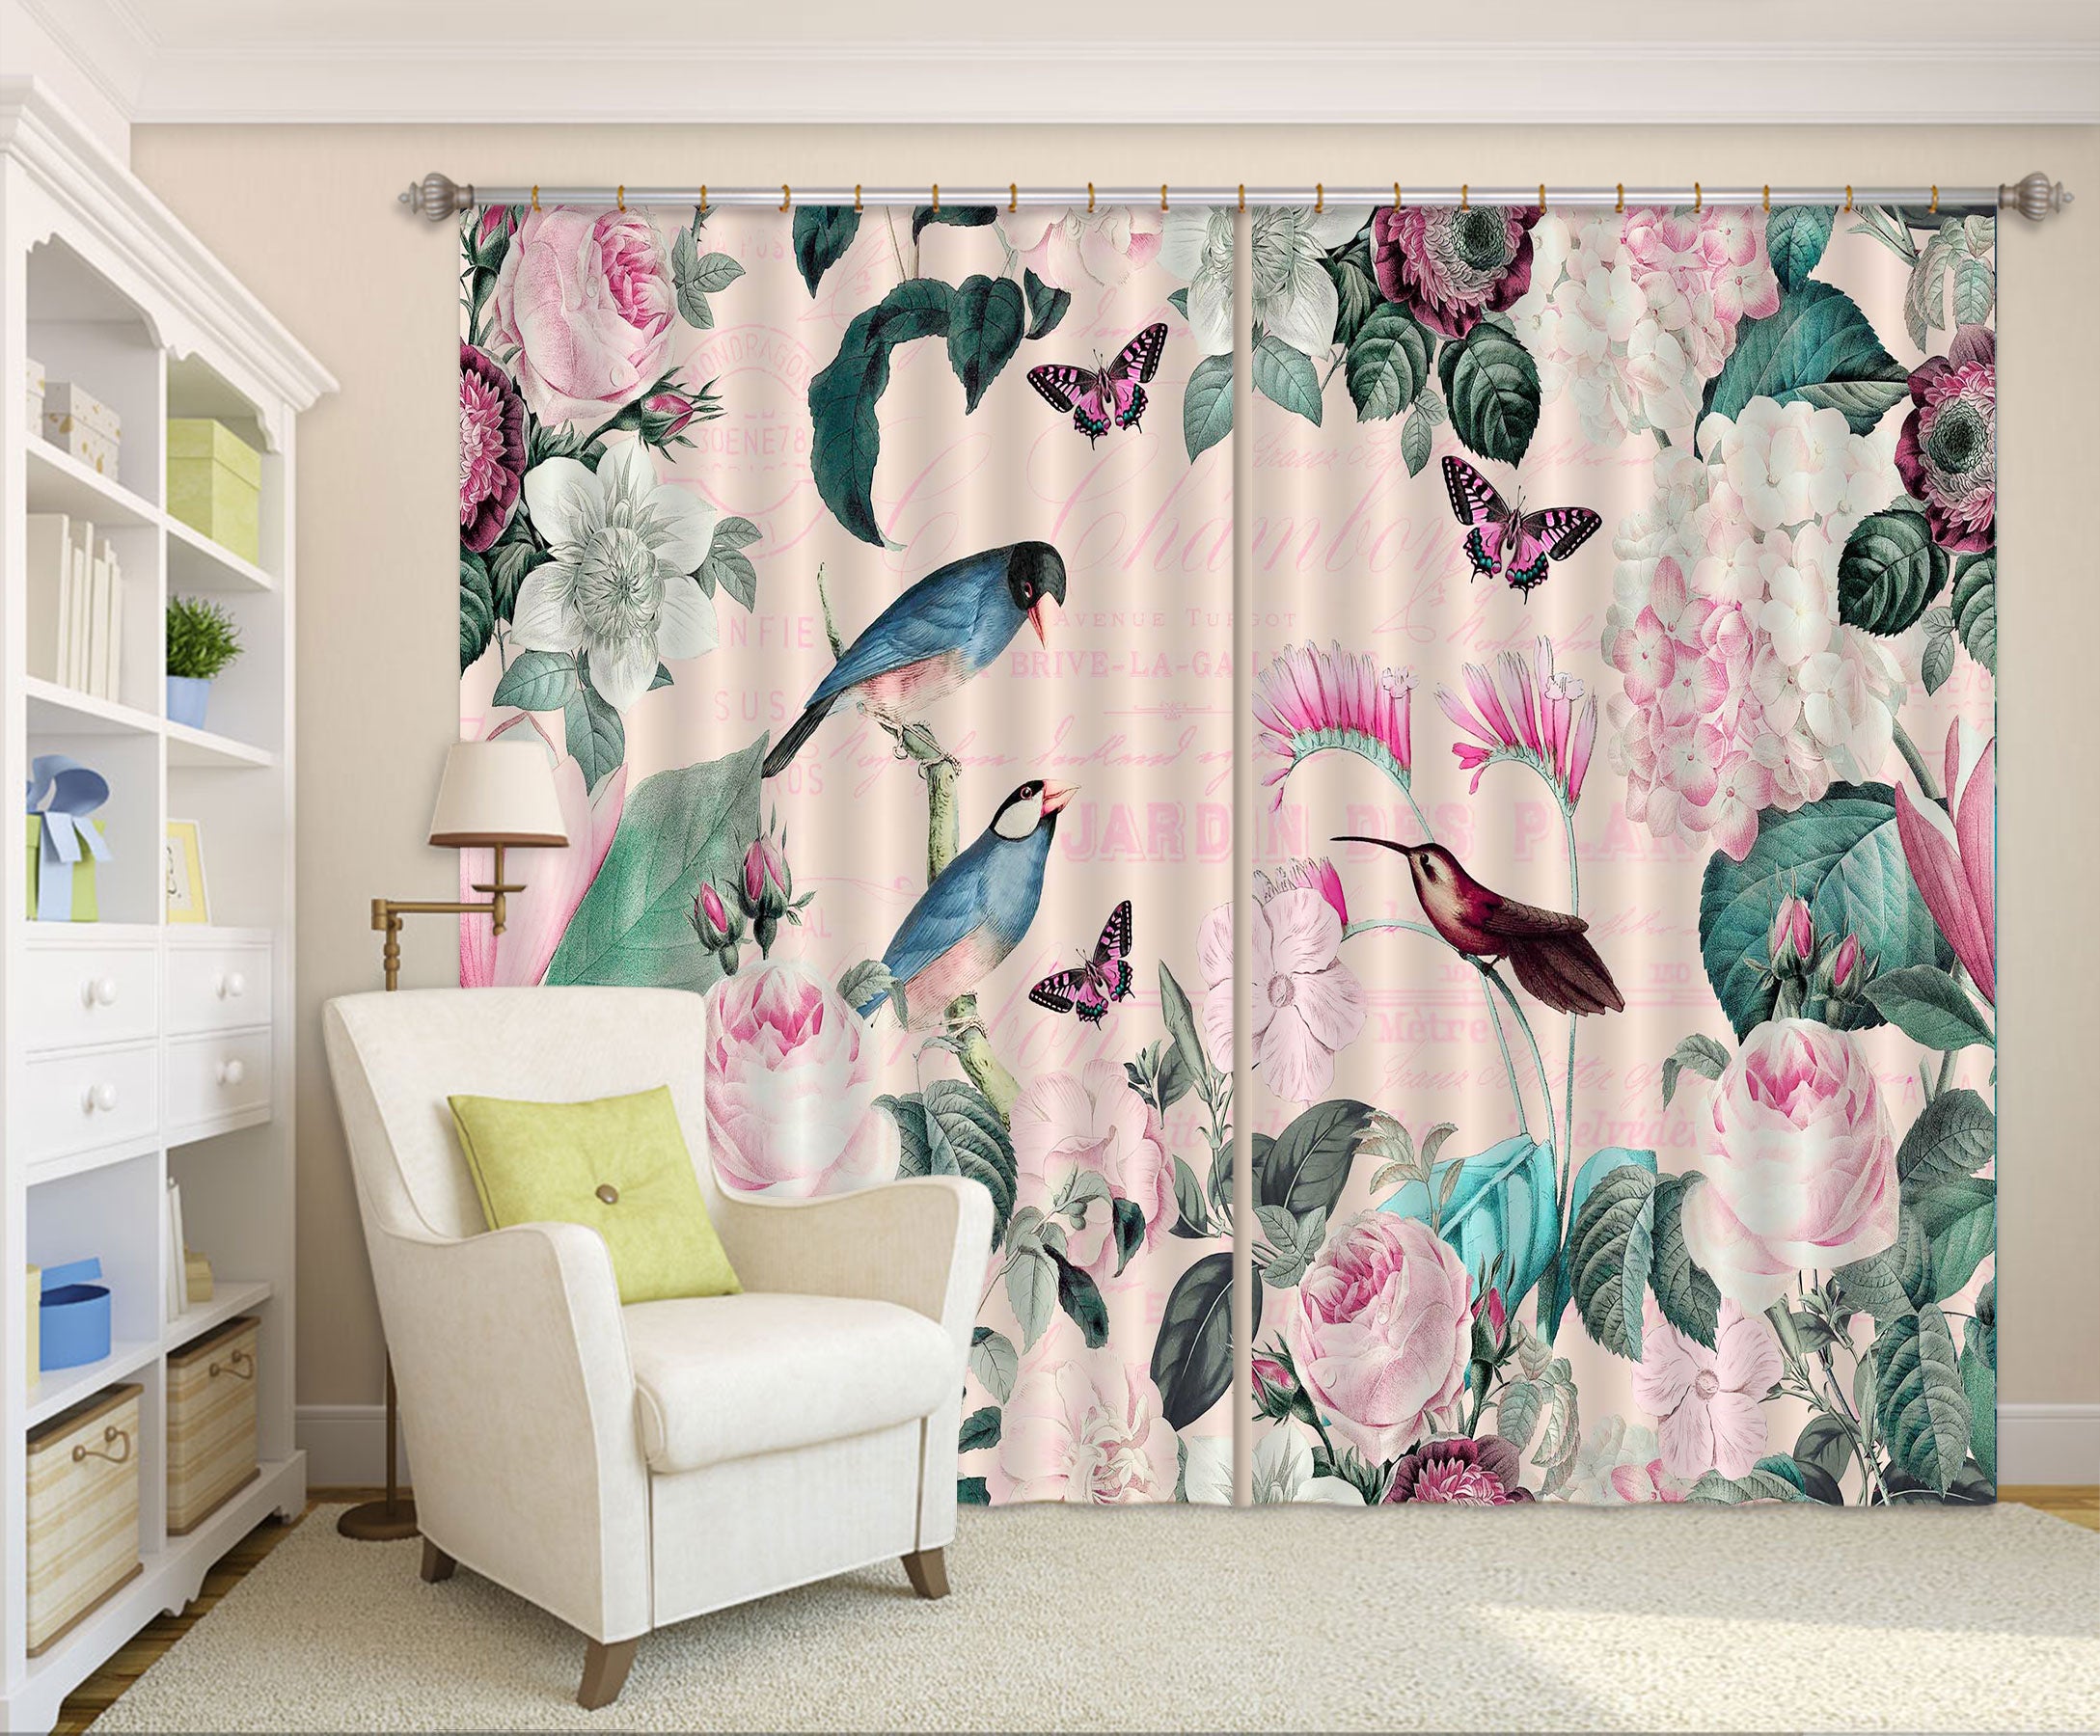 3D Magpie Butterfly 019 Andrea haase Curtain Curtains Drapes